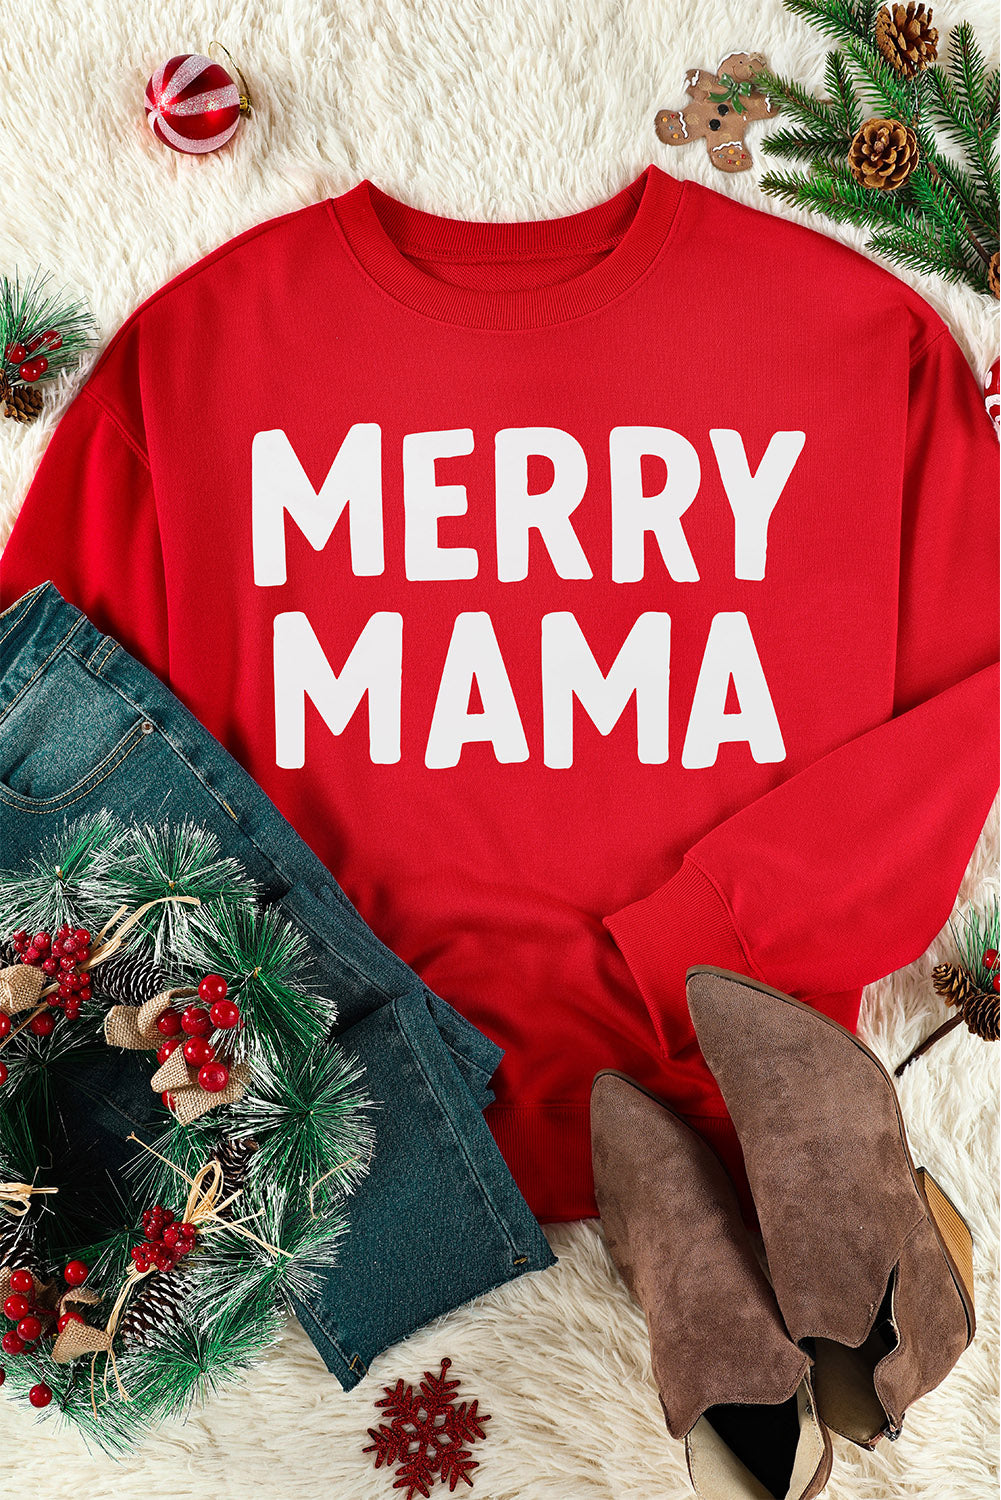 Fiery Red MERRY MAMA Long Sleeve Pullover Sweatshirt Red-2 70%Polyester+30%Cotton Graphic Sweatshirts JT's Designer Fashion